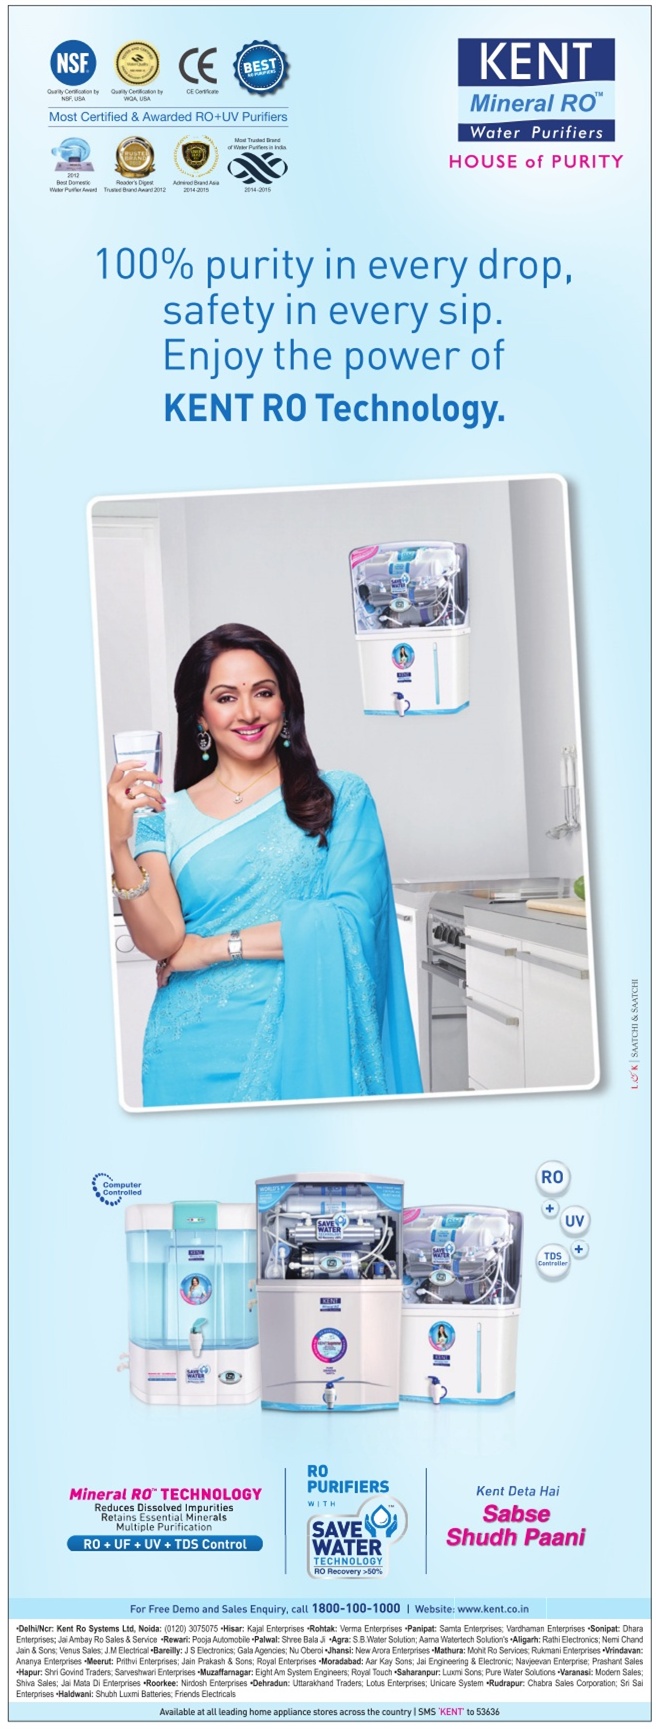 kent-mineral-ro-water-purifiers-ad-toi-del-10-6-2017